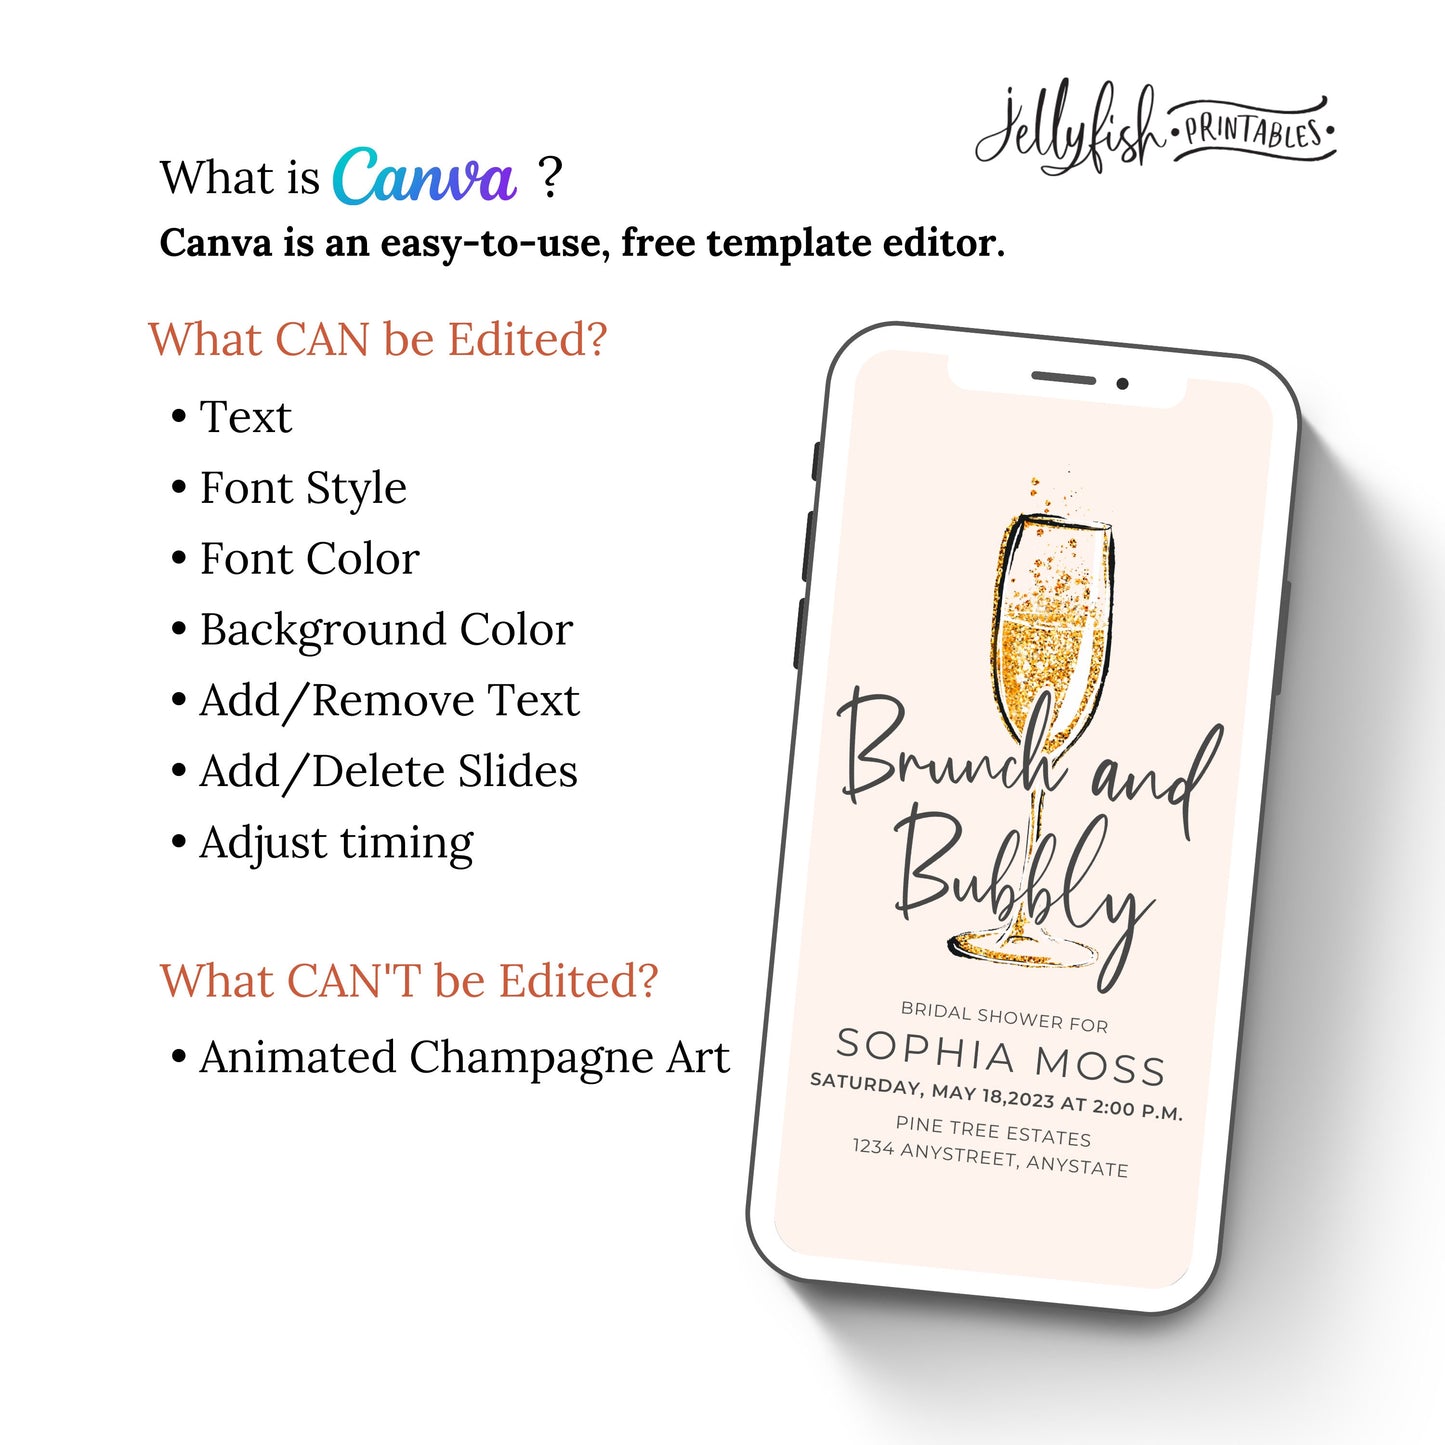 Brunch and Bubbly Bridal Video Invitation Canva Template Send Today!